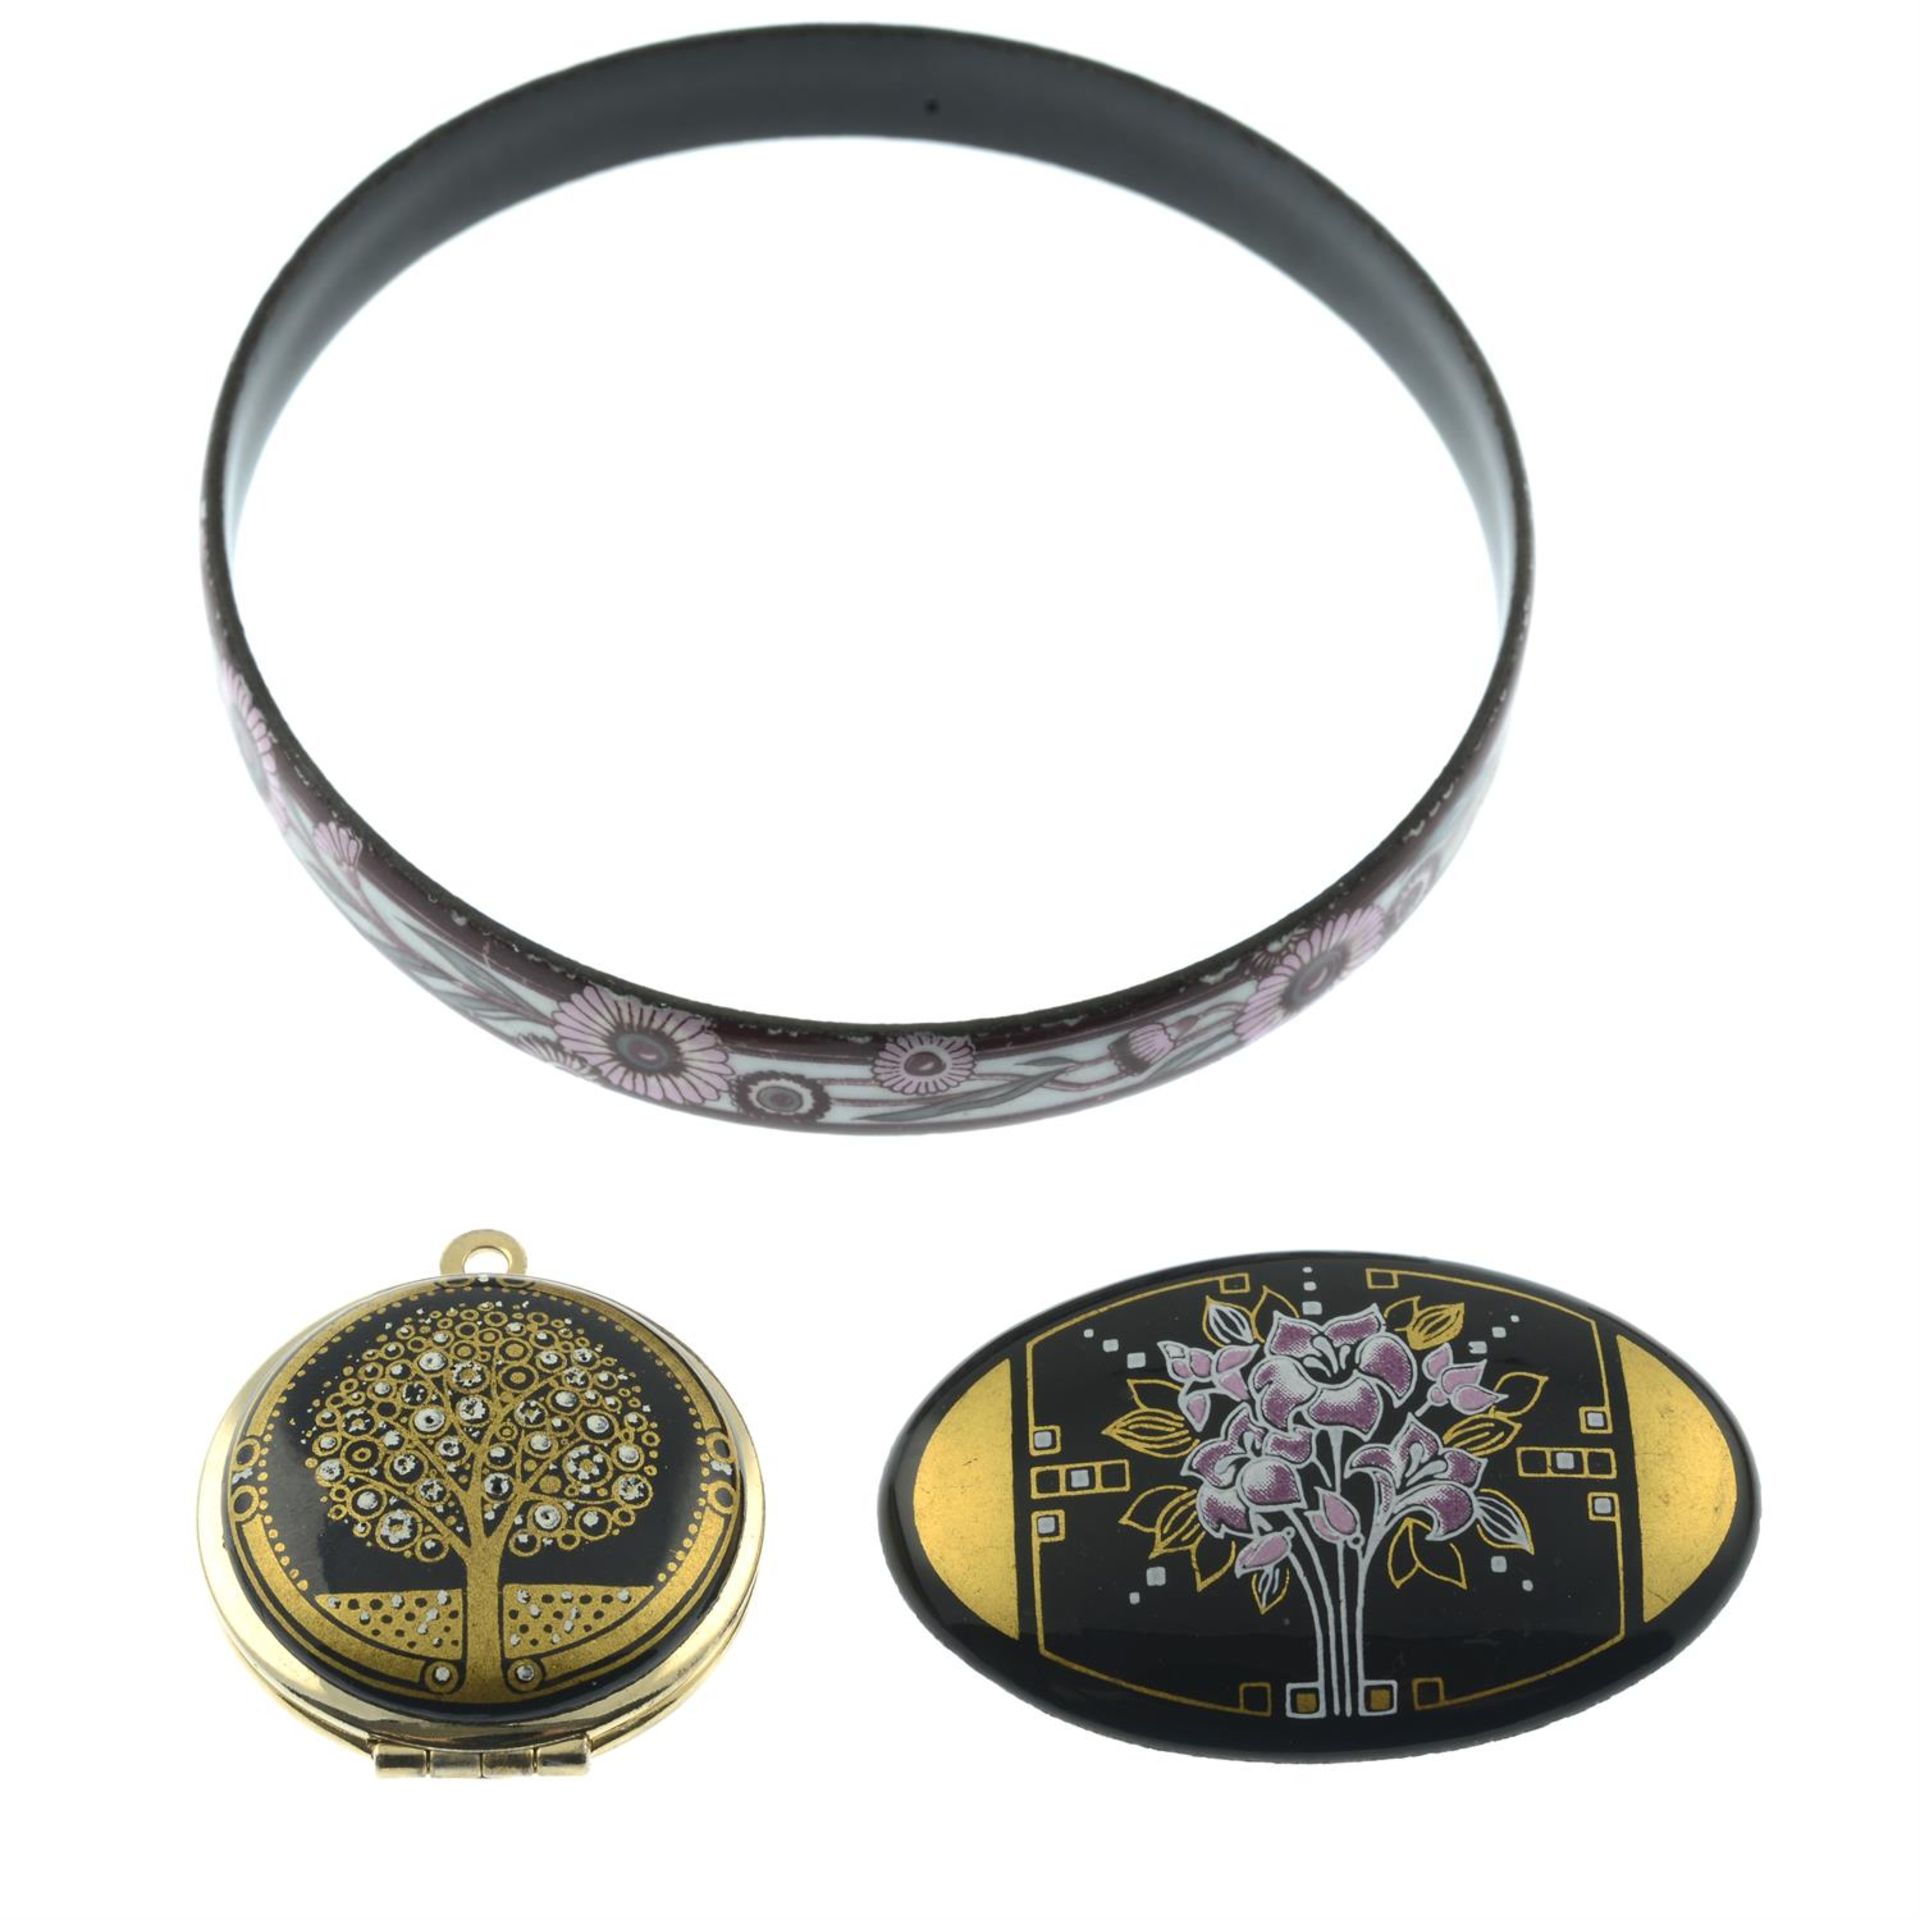 Three items of enamel jewellery, to include a locket, bangle and a brooch by, Michaela Frey.